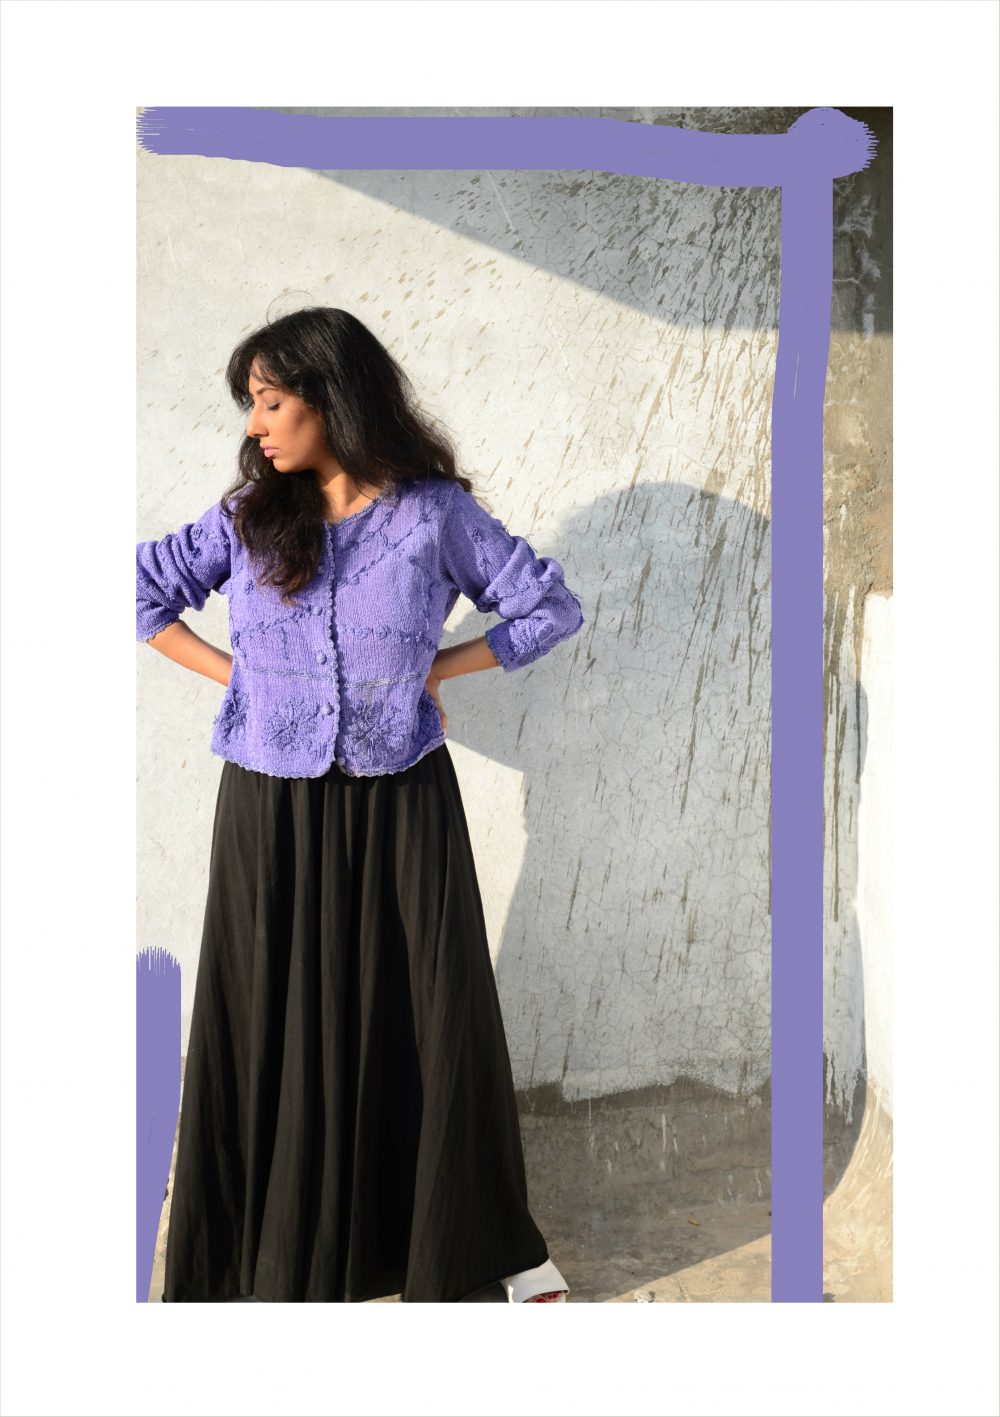 Lookbook ; Conceptual ; fashion photography ; Lilac ; blue ; sweater ; Goa ; vintage ; pop of colors ; nude lips ; messy hair ; strong ; winter fashion ; winter outfit ; Dark ; Naznin ; hyderabad fashion bloggers ; hyderabad bloggers ; hyderabad fashion blogger ; I Dress for the Applause ; 